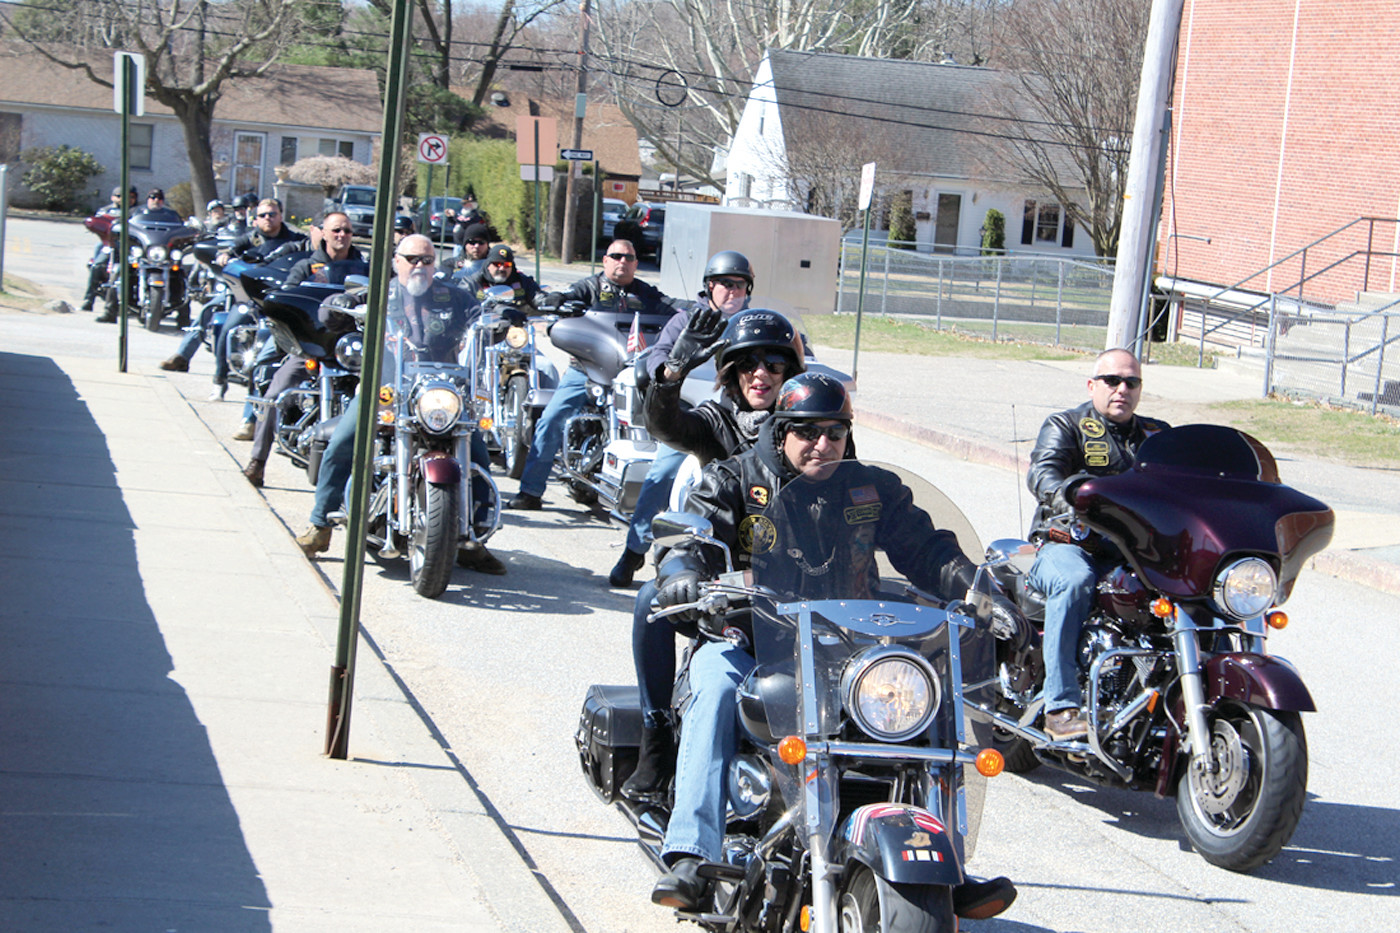 FIVE MINUTES: It took more than five minutes for all three hundred motorcyclists to leave the parking lot at Cranston West, many offering a wave or a peace sign on their way out.